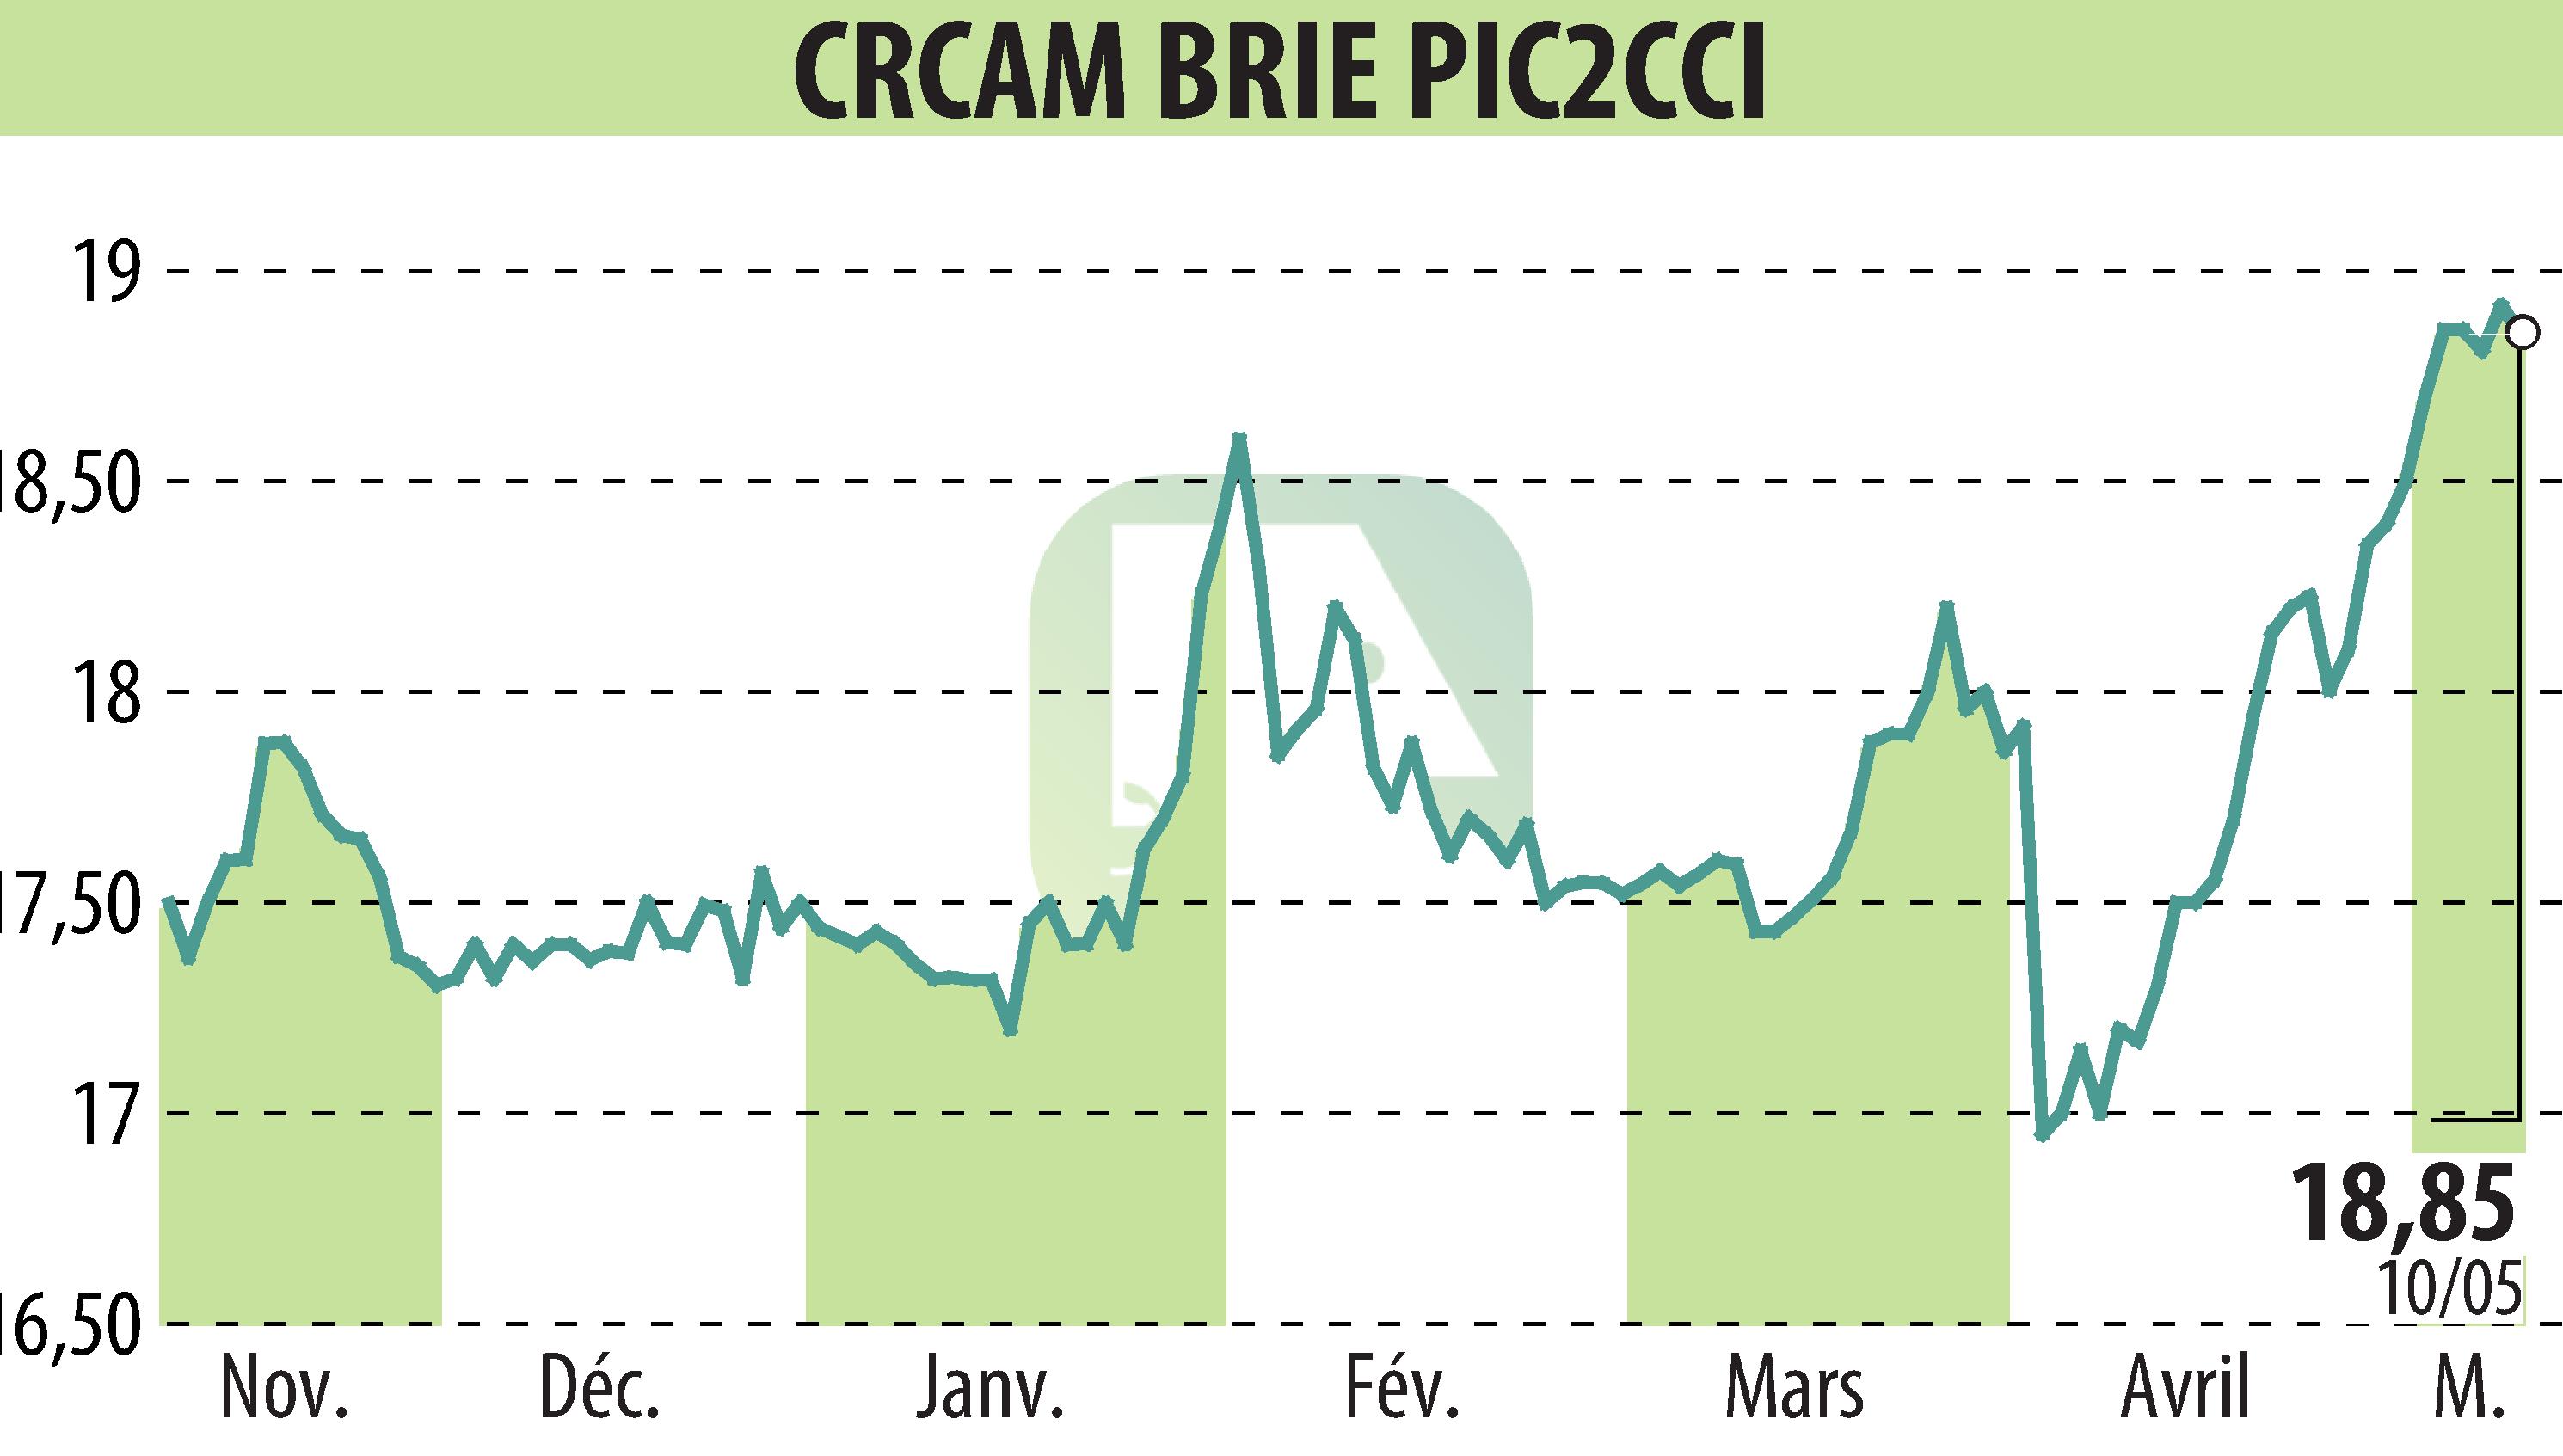 Stock price chart of Crédit Agricole Brie Picardie (EPA:CRBP2) showing fluctuations.